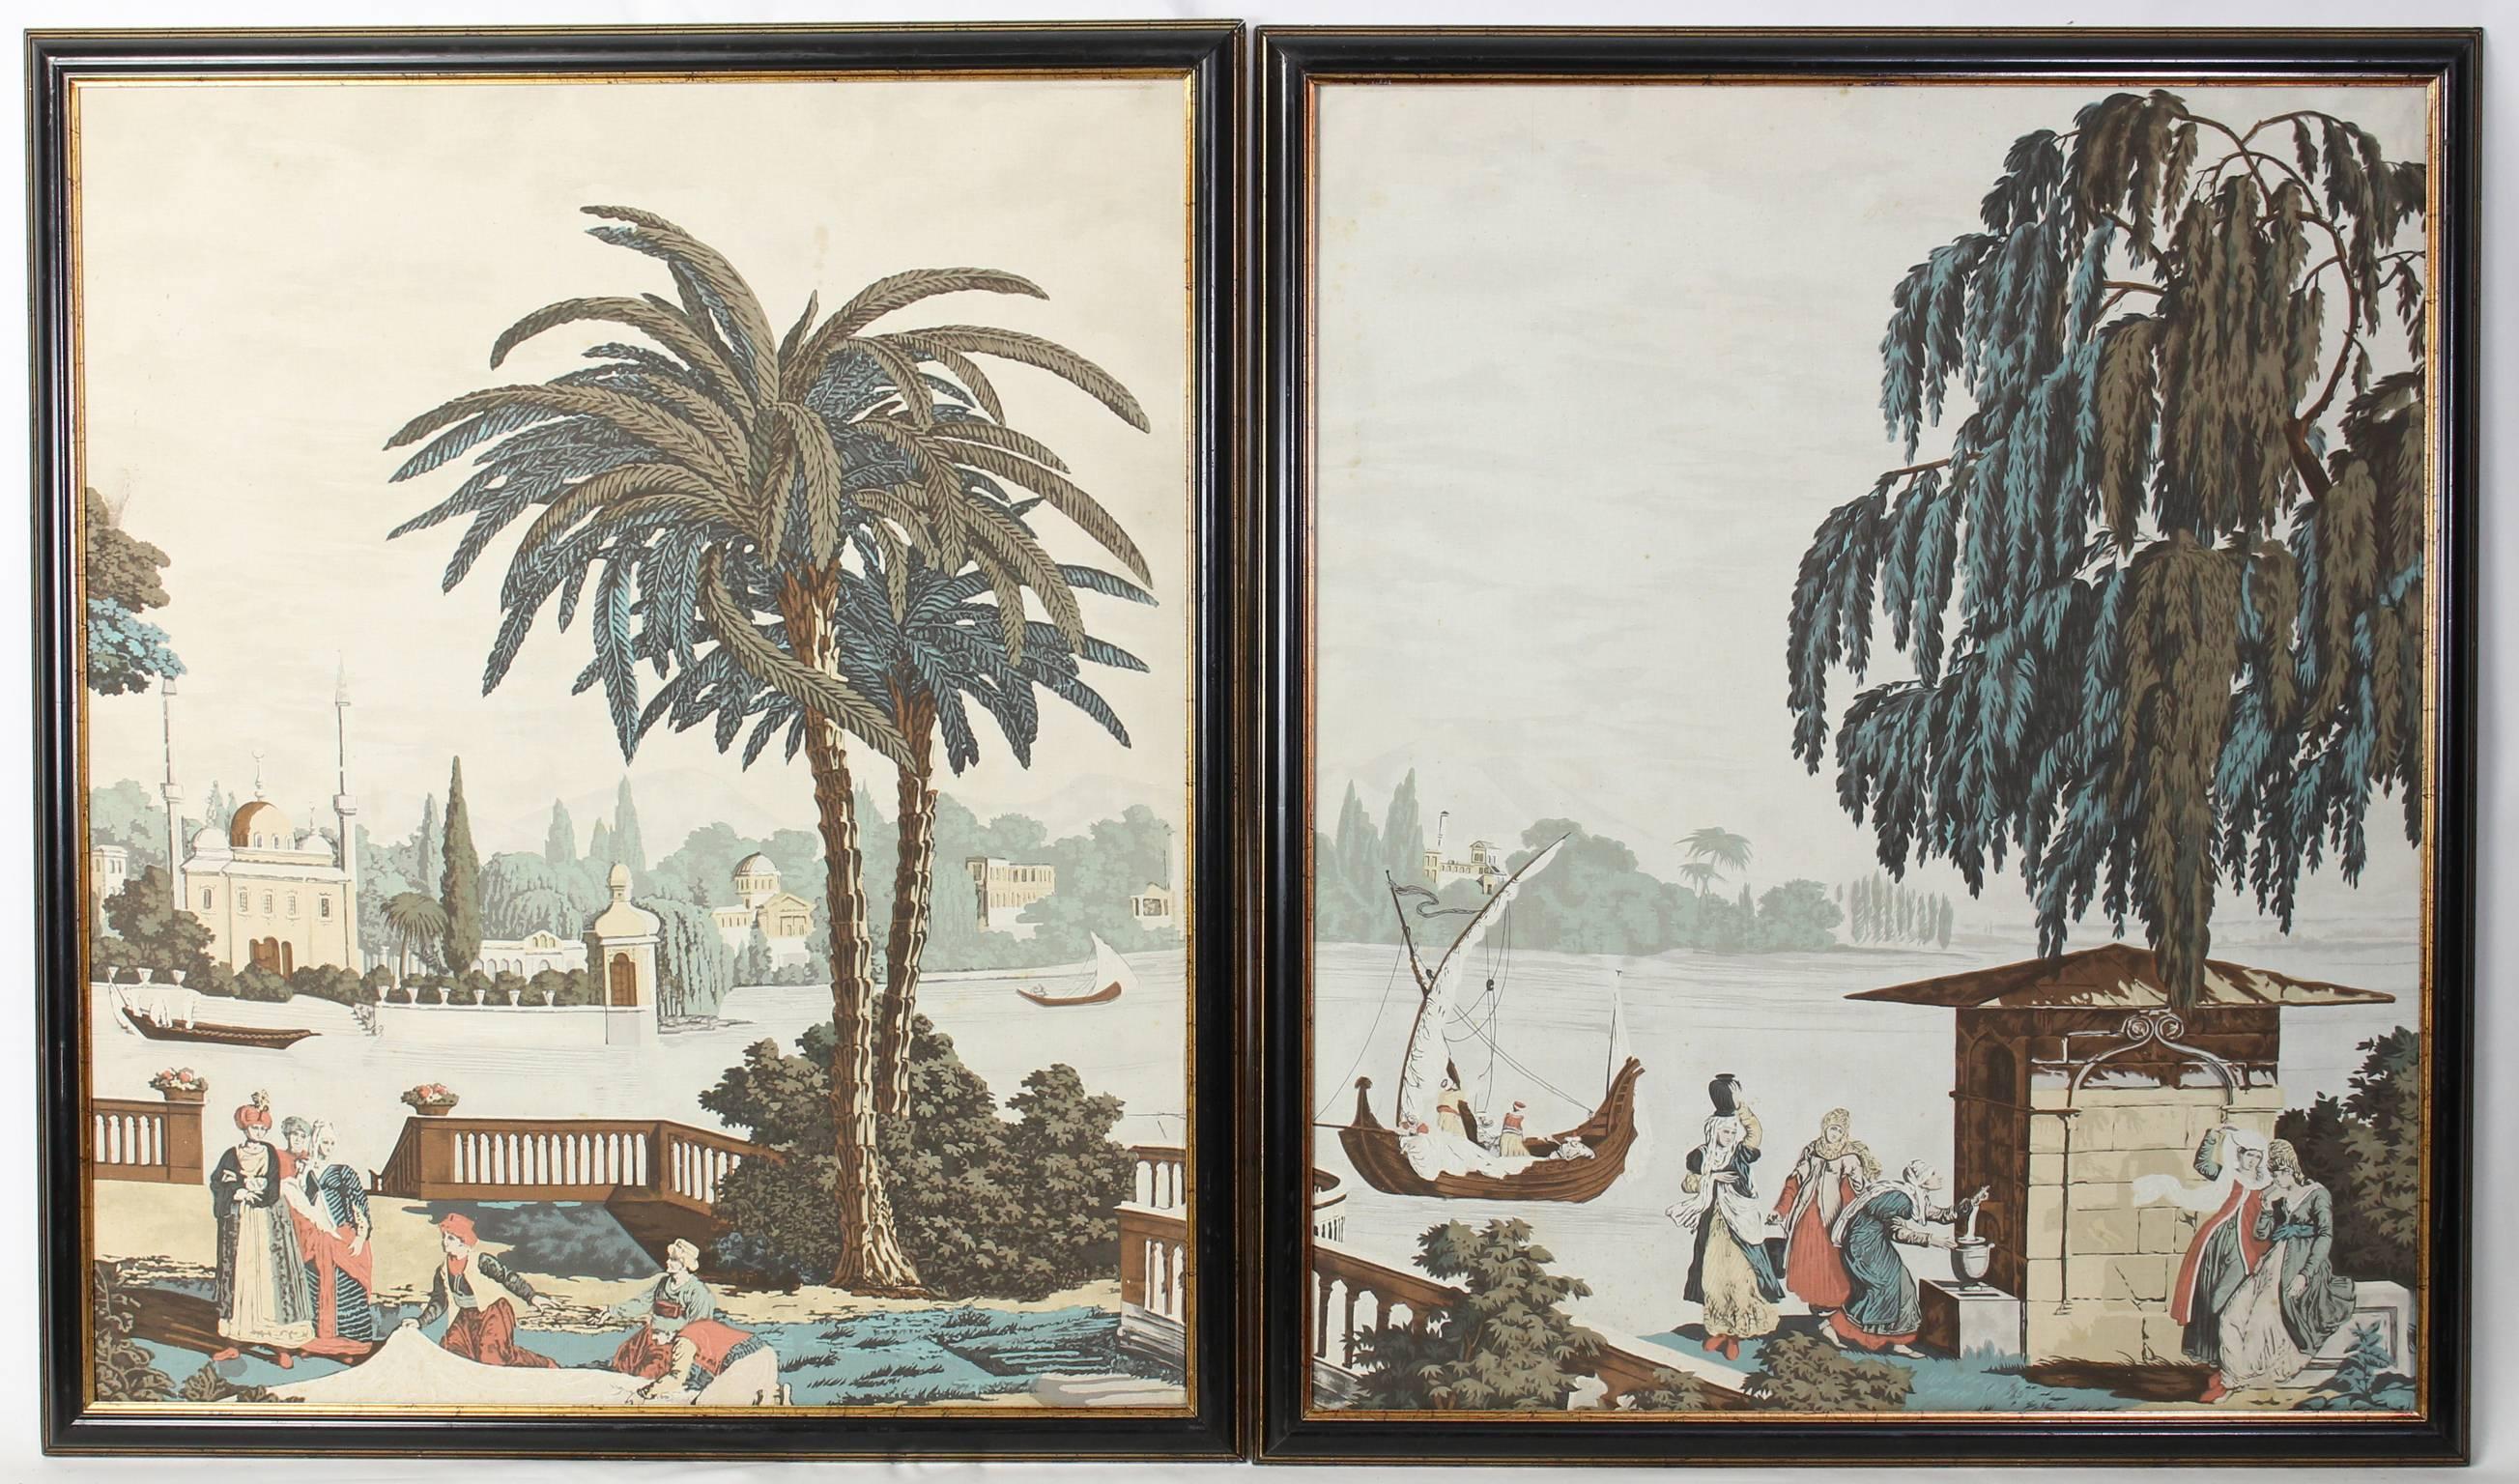 A stunning pair of framed Zuber style printed fabric panels depicting an exotic scene of a Turkish landscape.